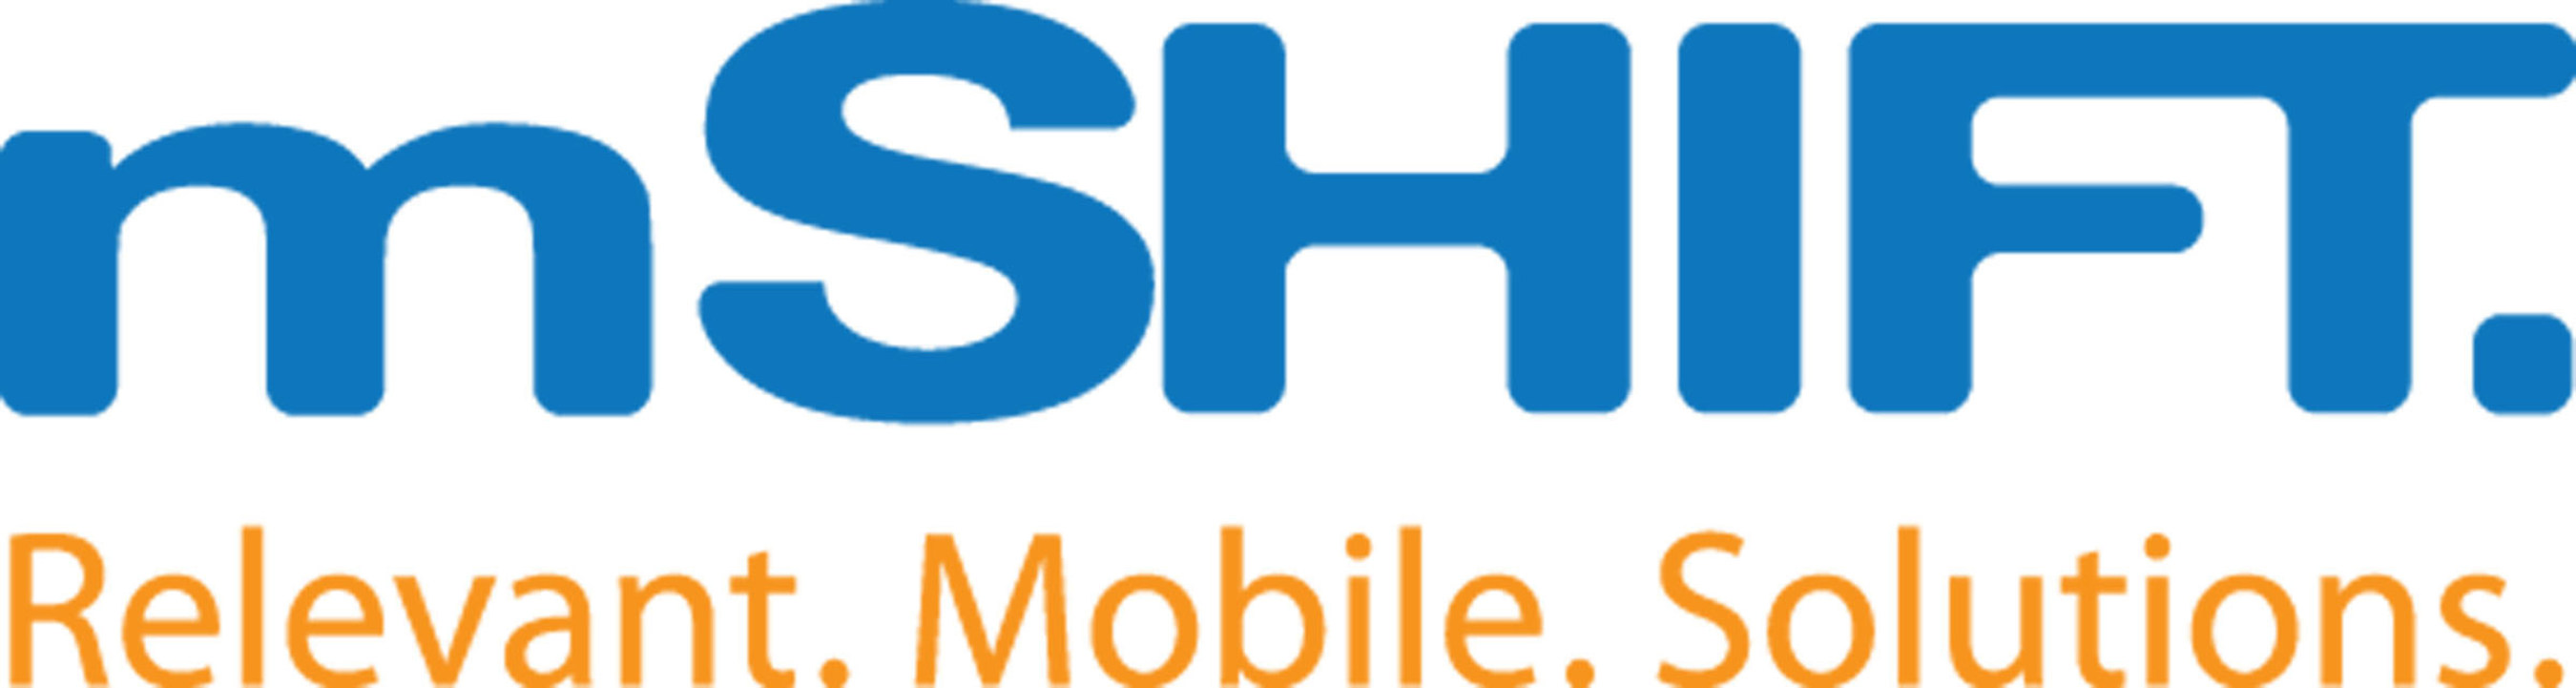 MShift has been providing mobile banking and payment solutions to US financial institutions since 1999.  MShift's latest product is an innovative new mobile payment network called AnyWhereMobile.